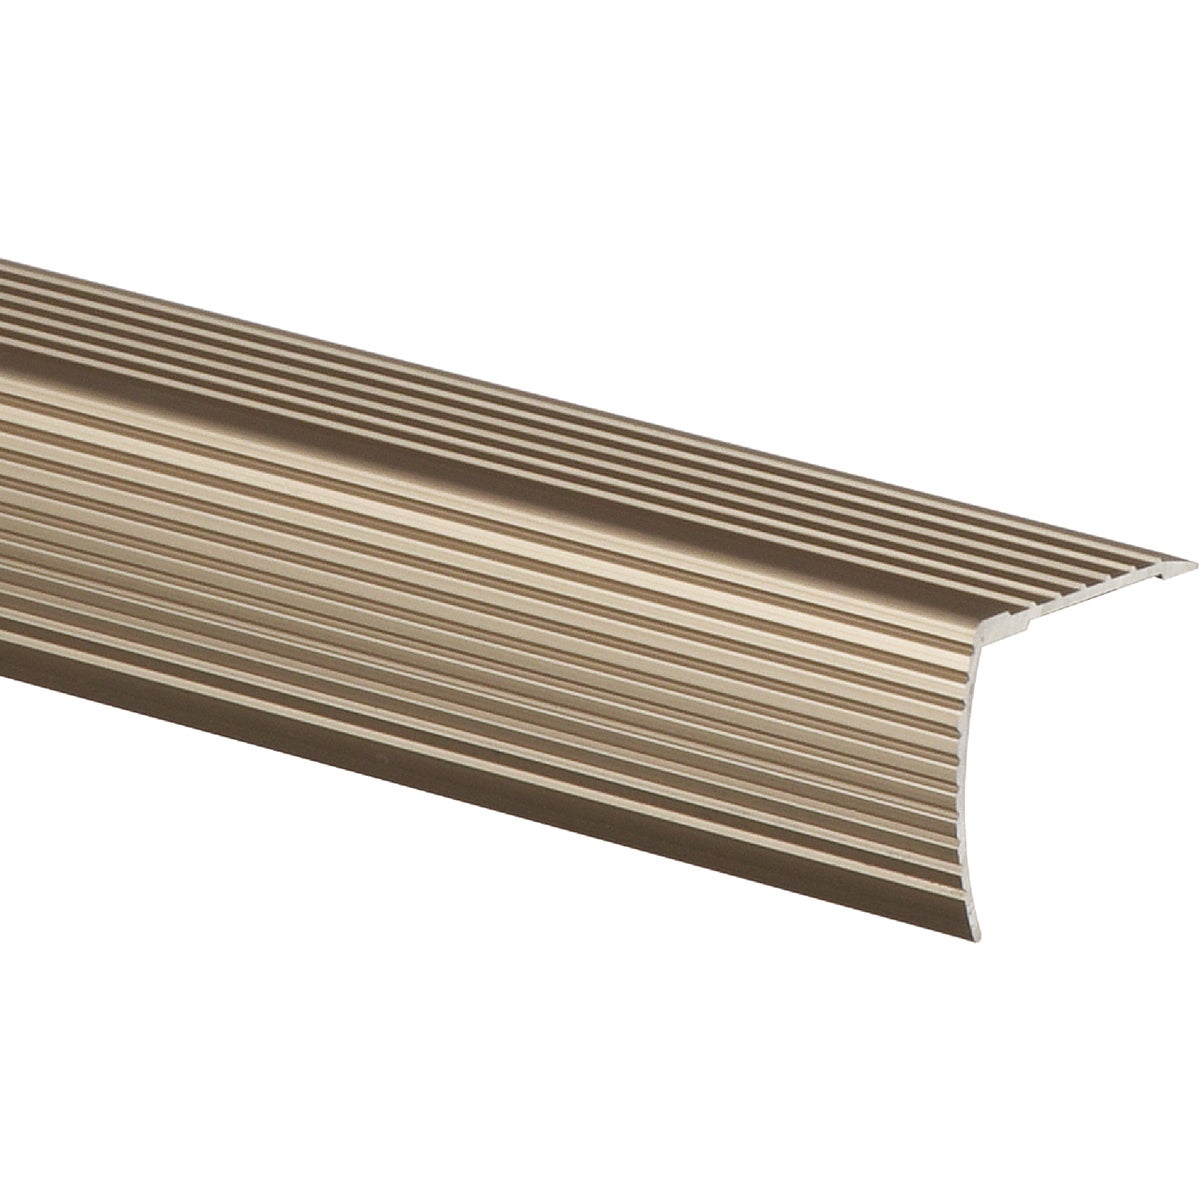 Item 261377, EZ self-stick stair edging covers and protects edges of tiled or carpeted 